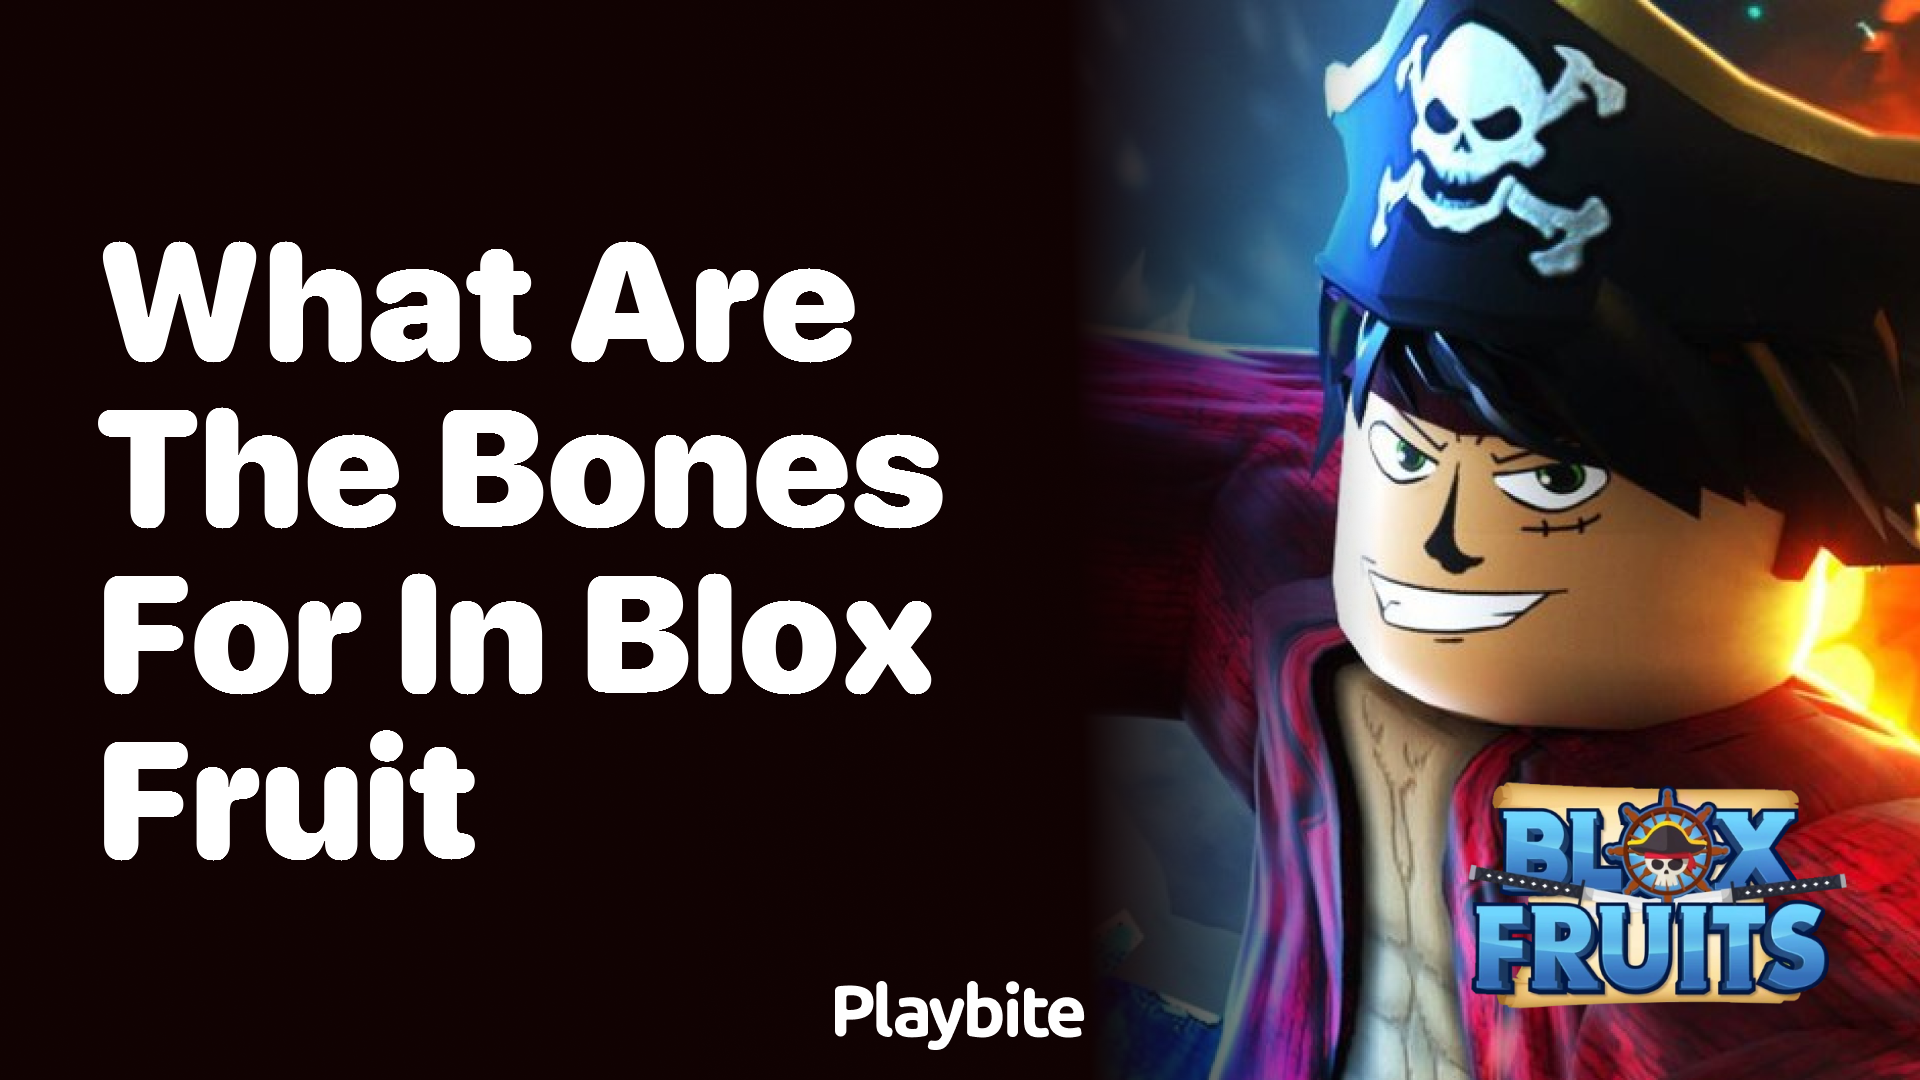 What Are the Bones For in Blox Fruit?